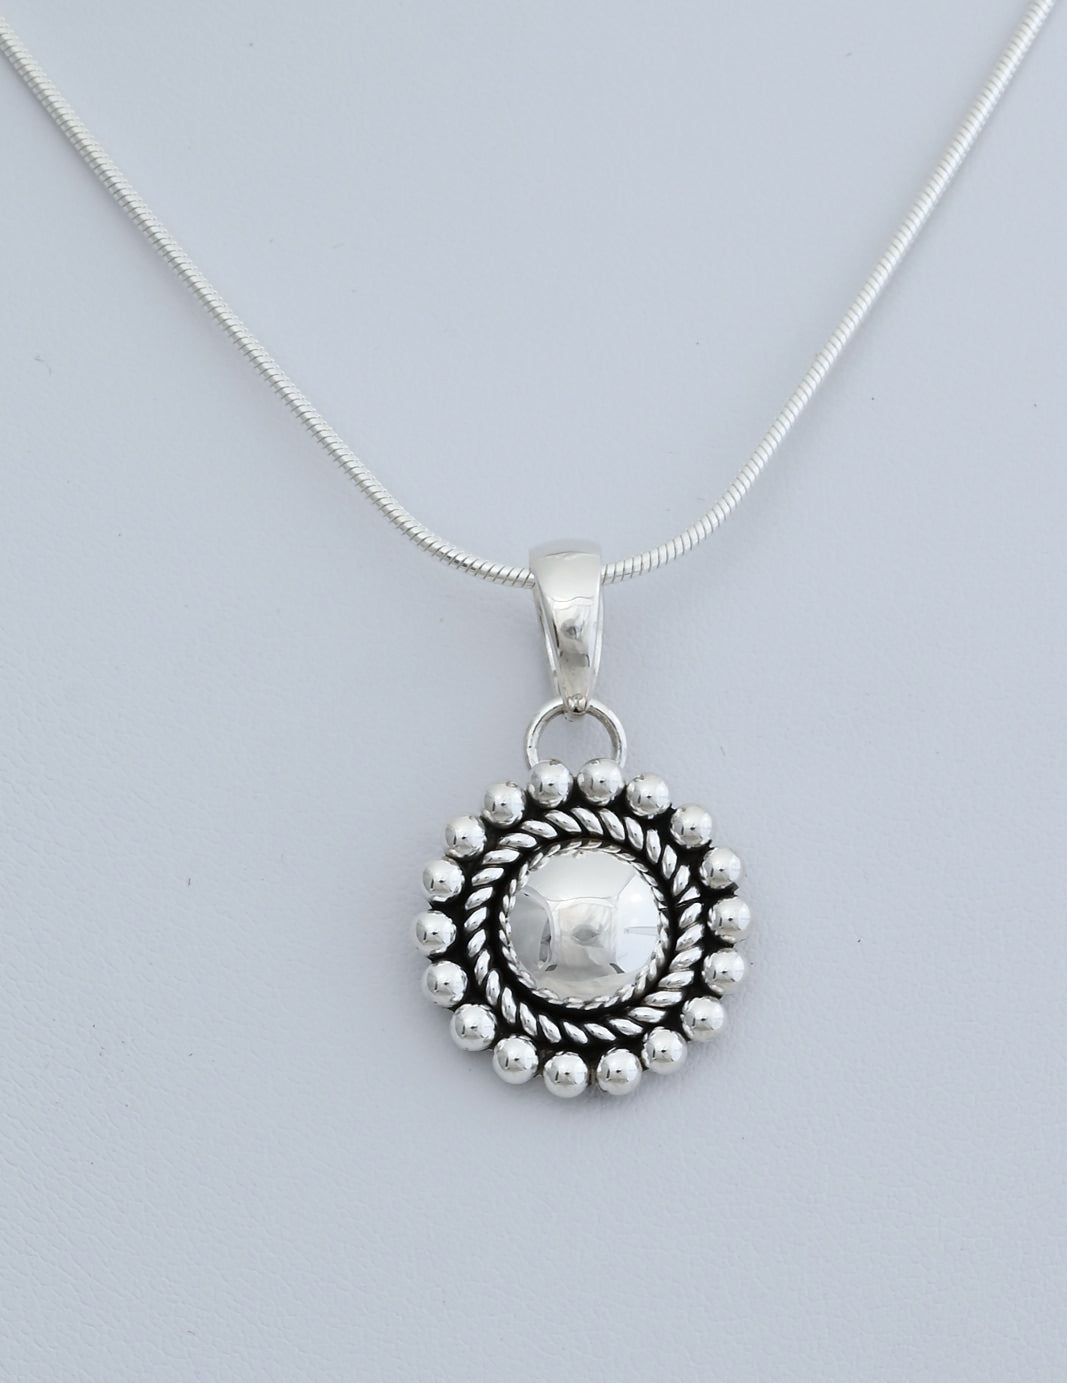 Pendant with Small Dome and Dots by Artie Yellowhorse